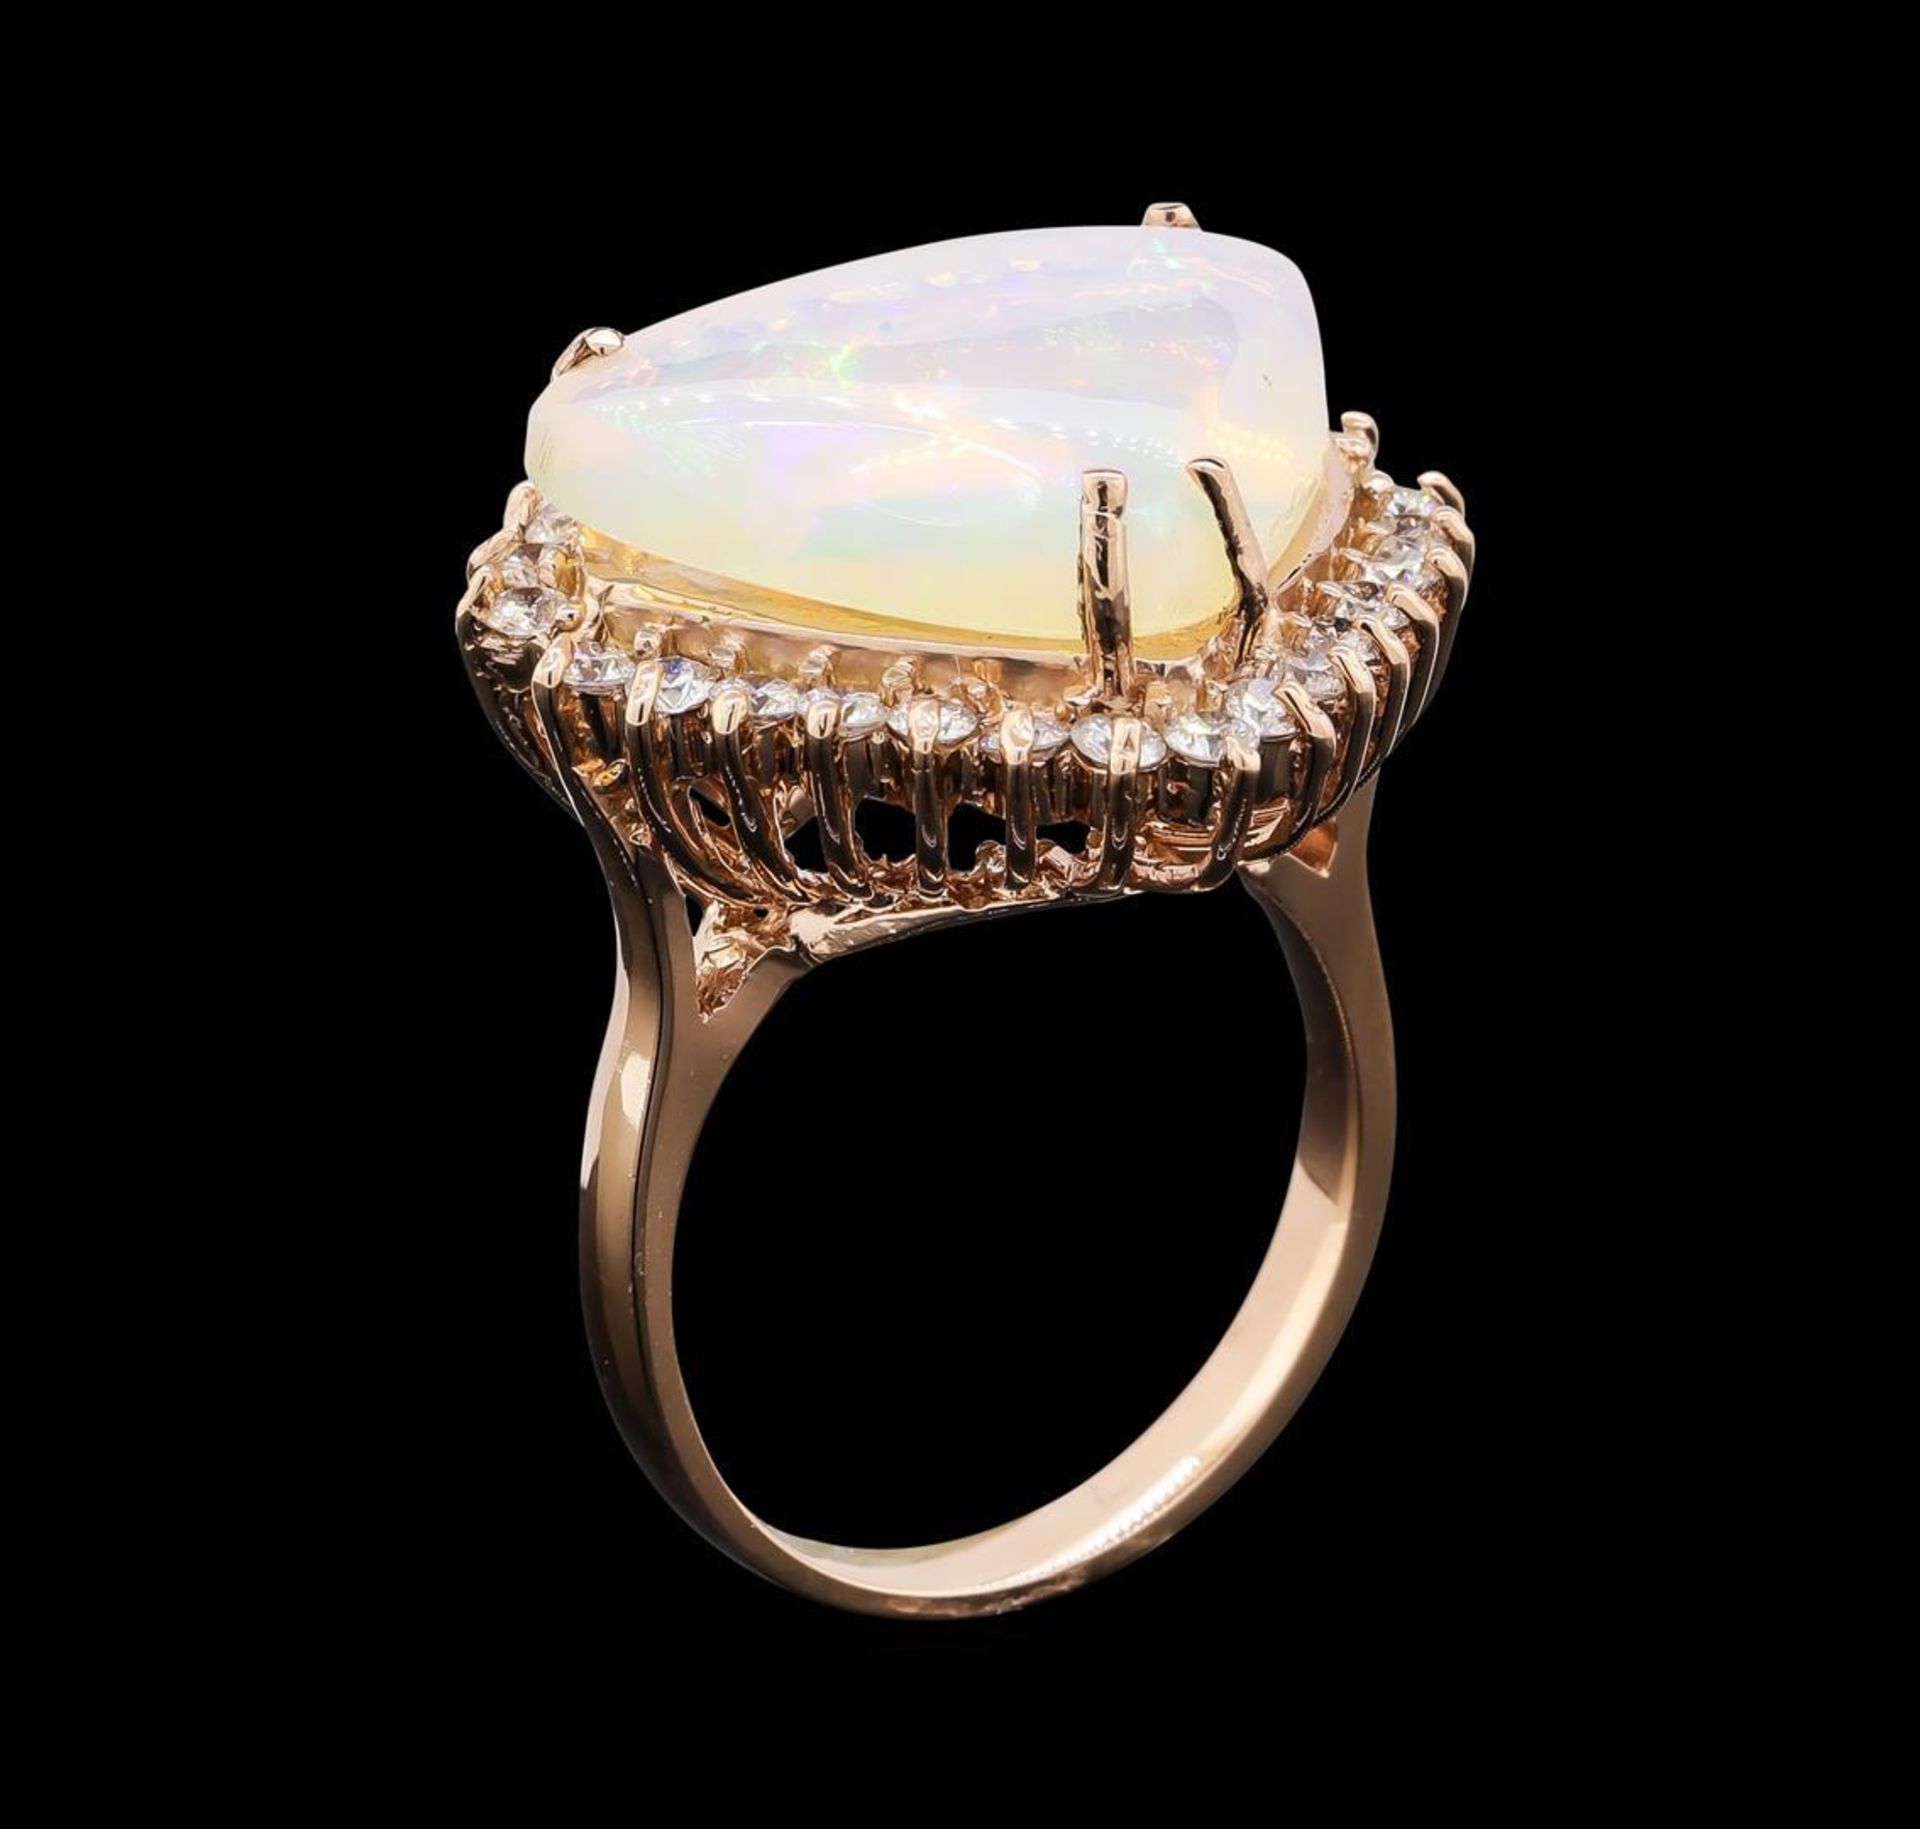 7.51 ctw Opal and Diamond Ring - 14KT Rose Gold - Image 4 of 5